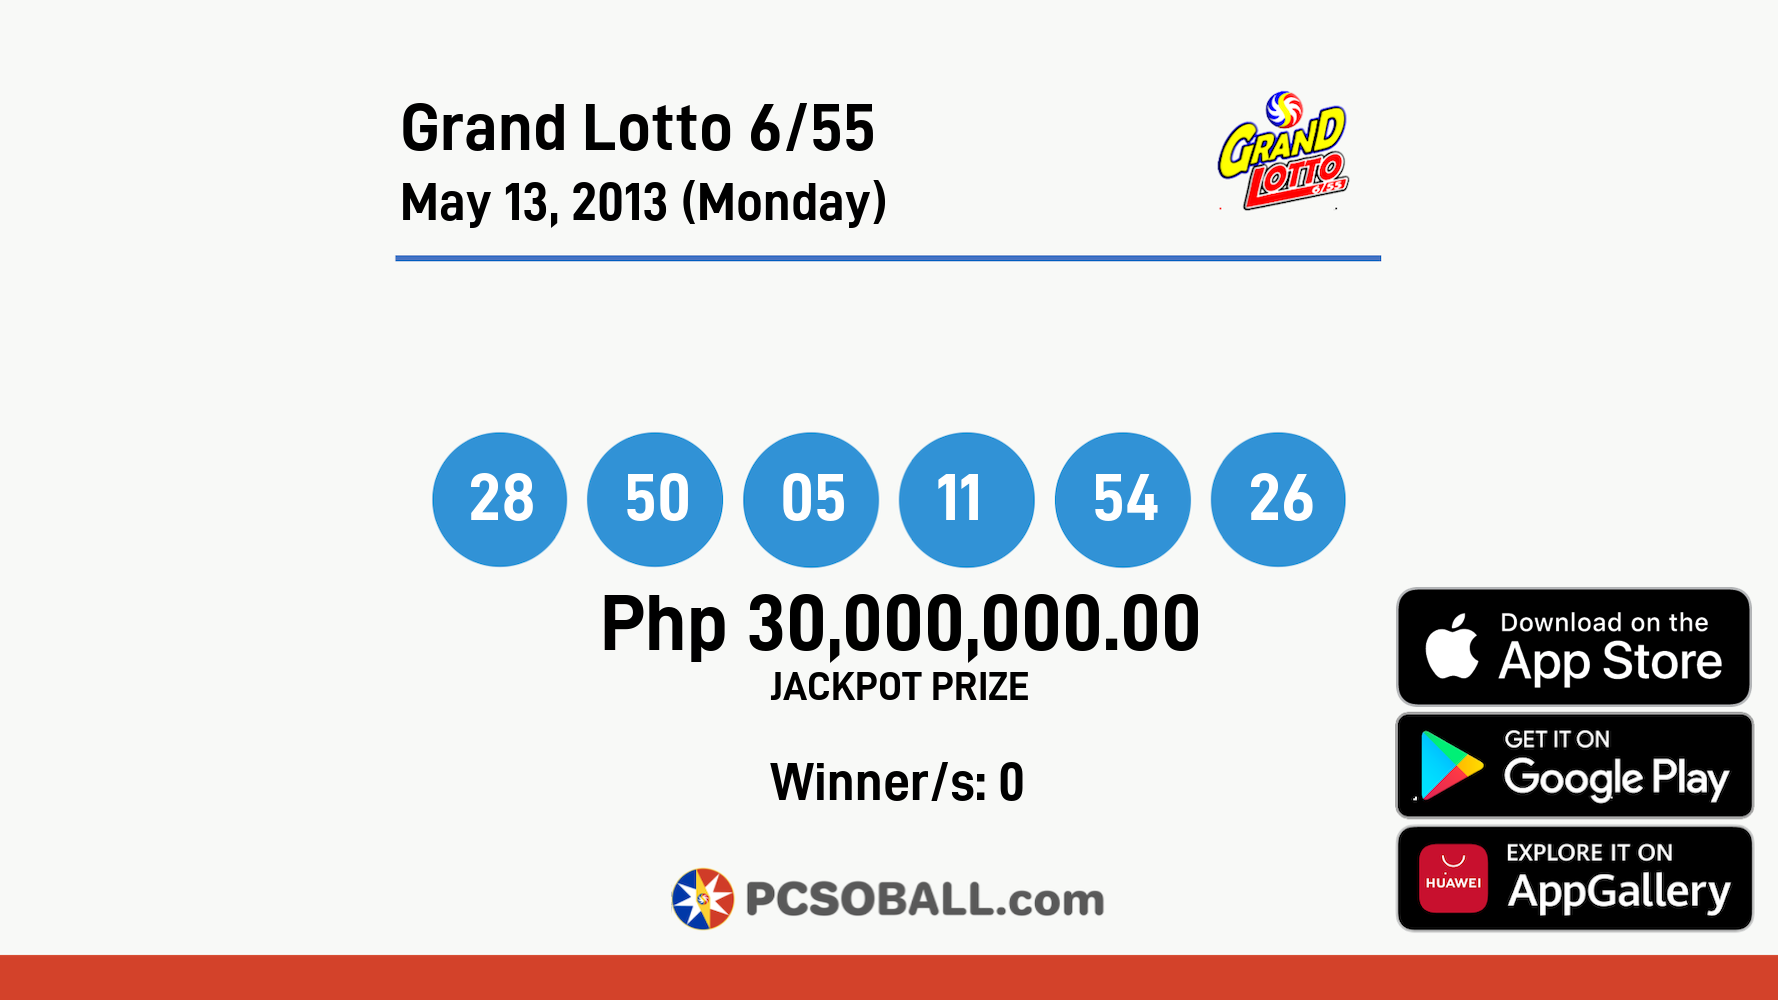 Grand Lotto 6/55 May 13, 2013 (Monday) Result